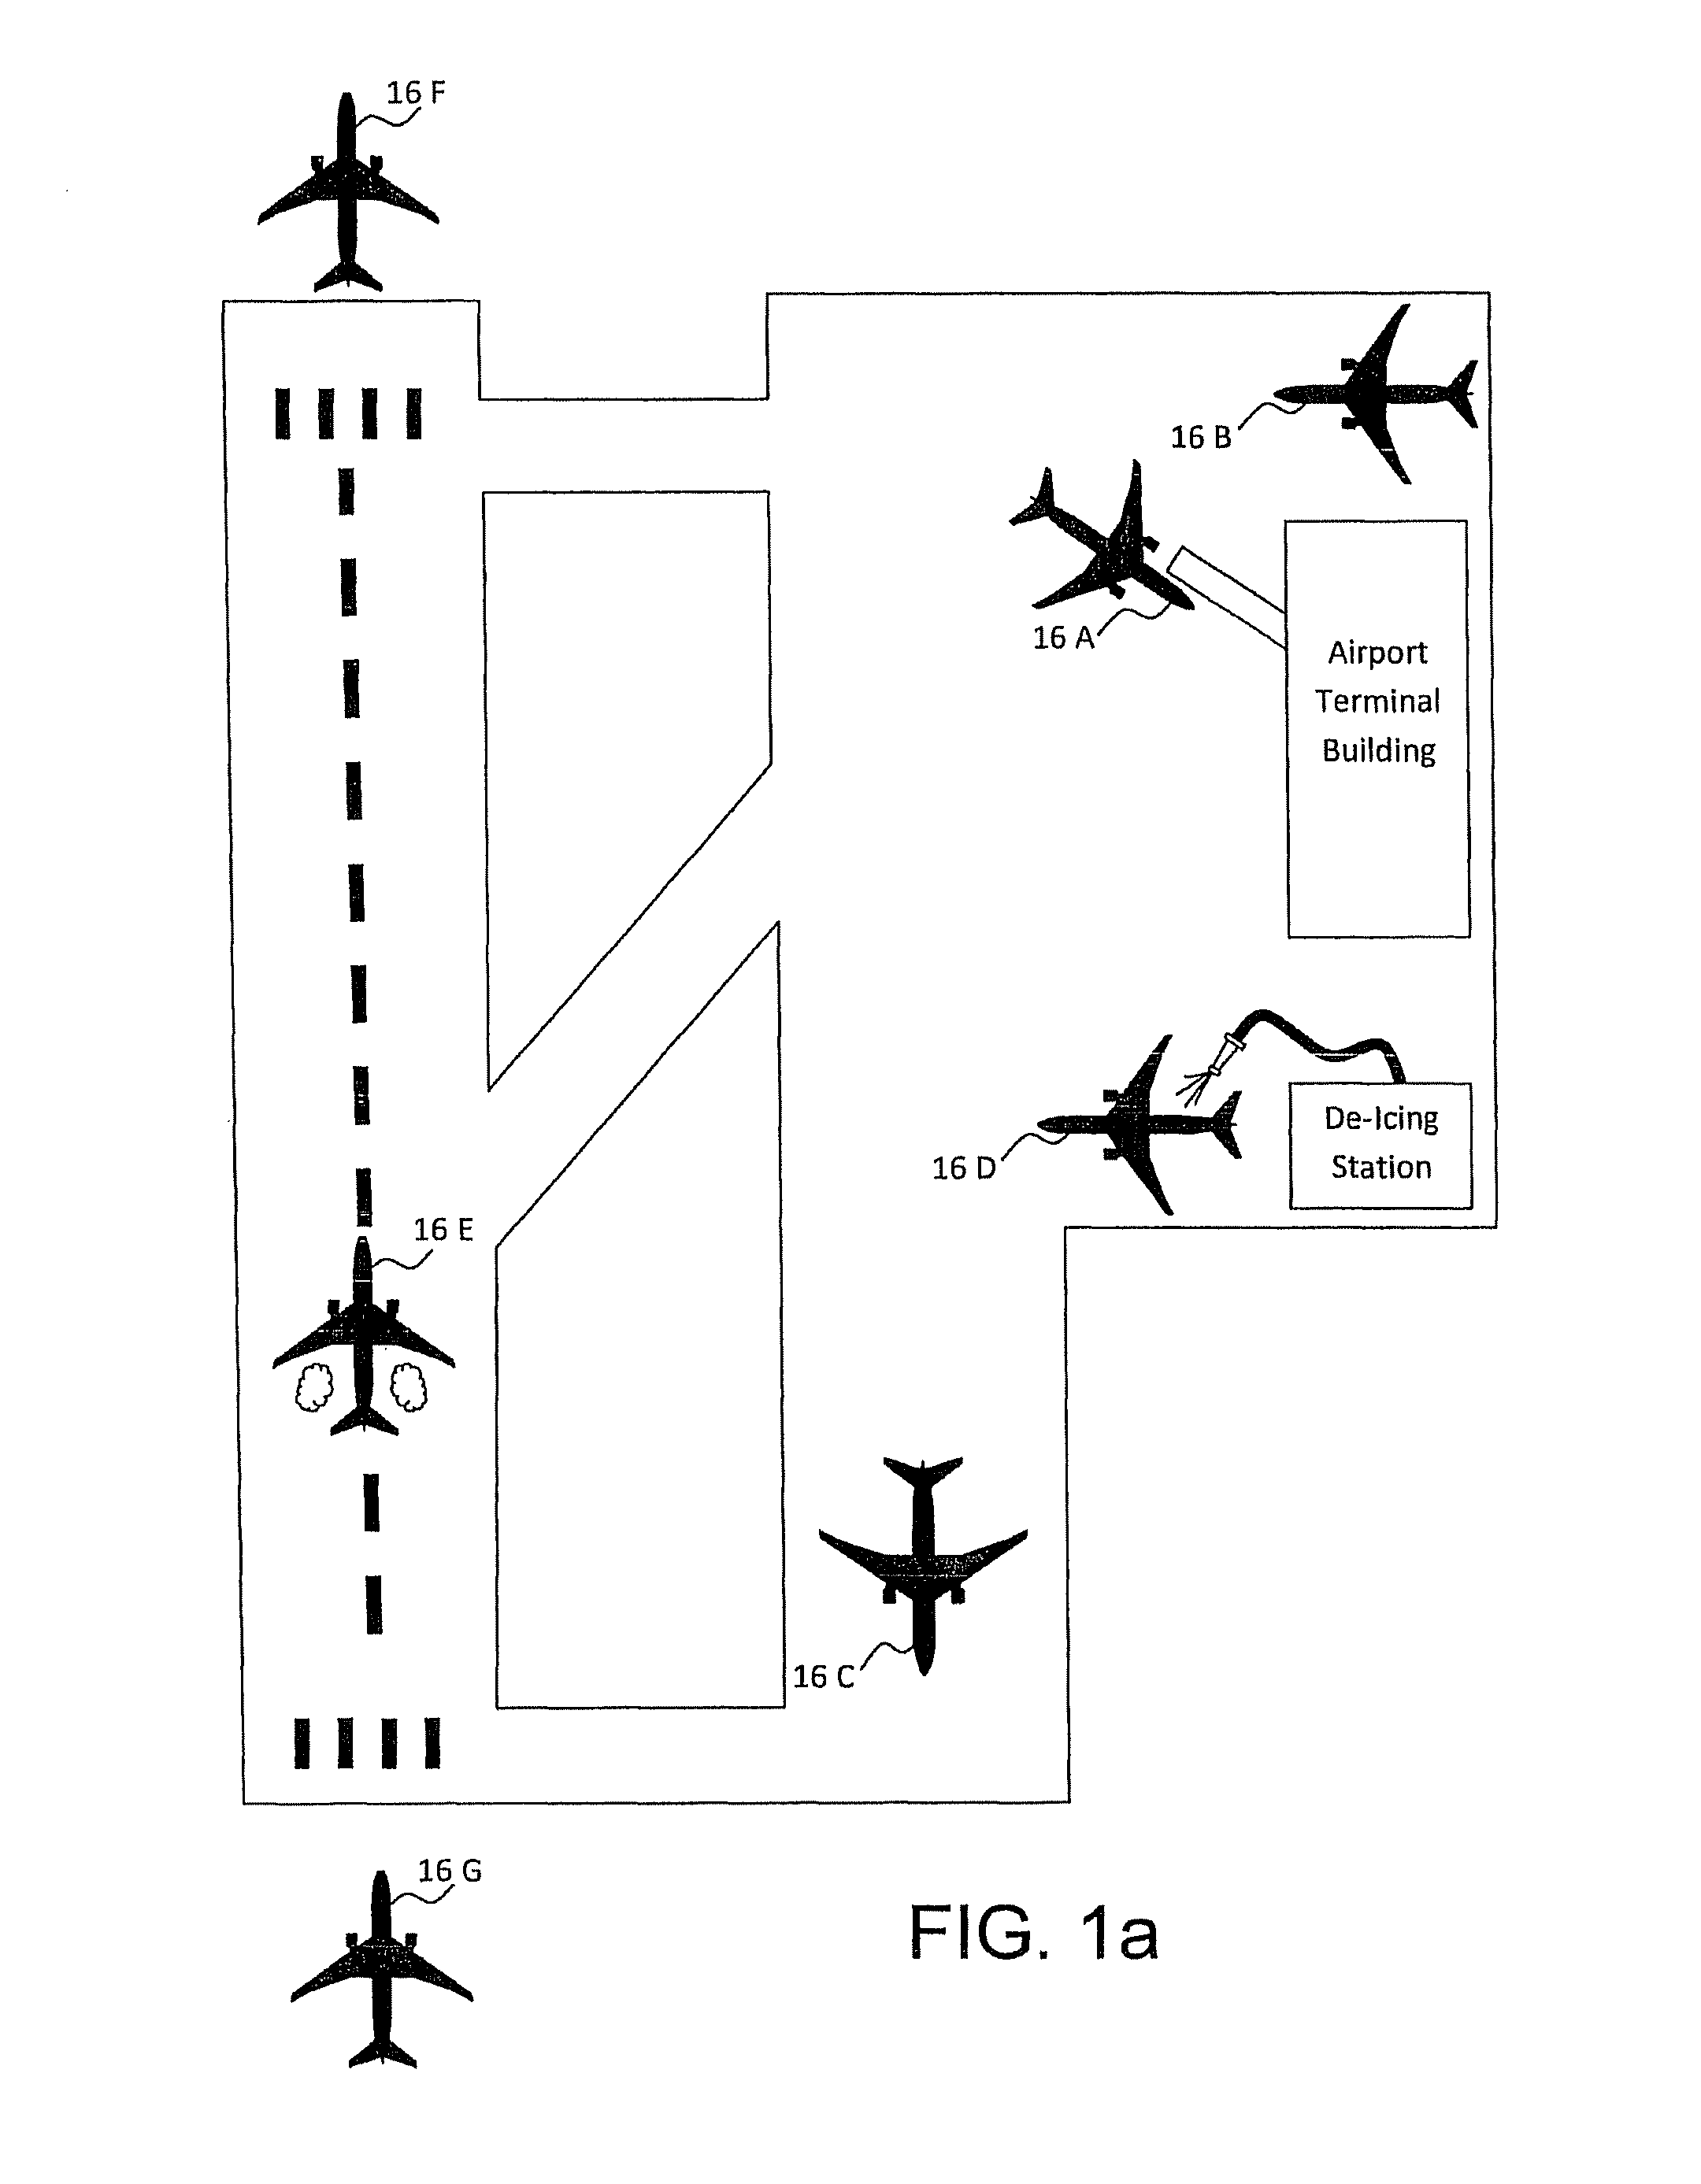 Methods for determination of optimum sequence for automated activation of onboard aircraft weight and balance system